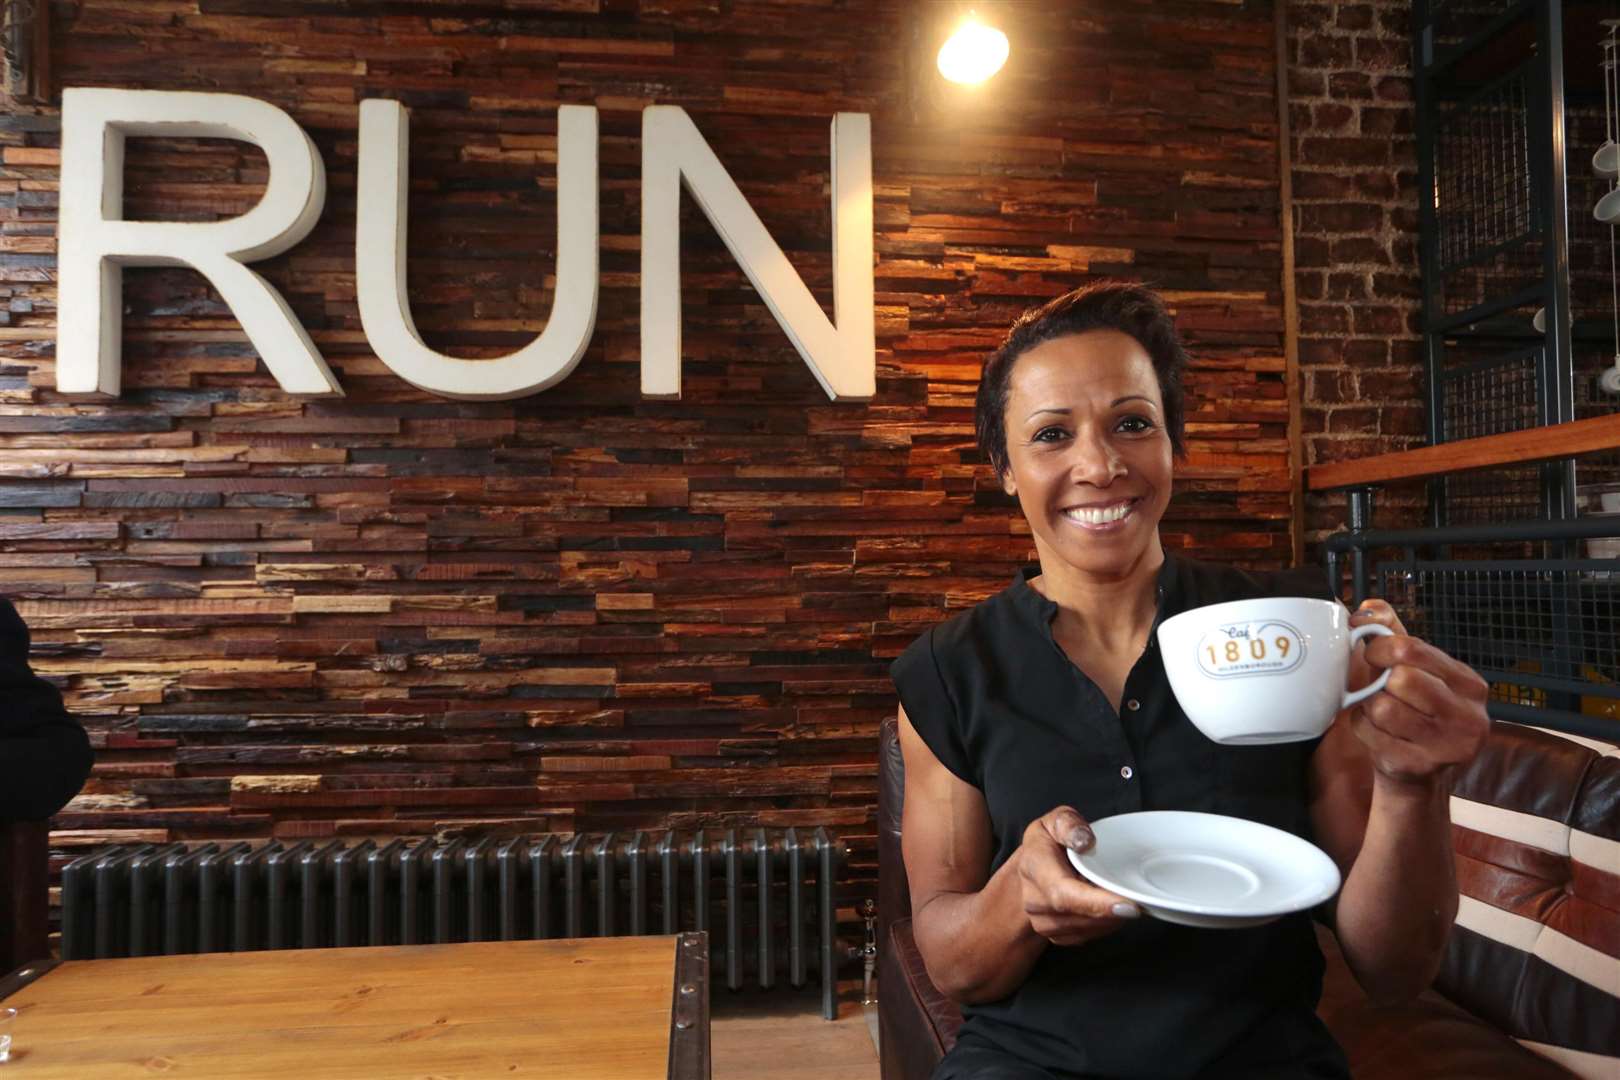 Dame Kelly Holmes at Cafe 1809.